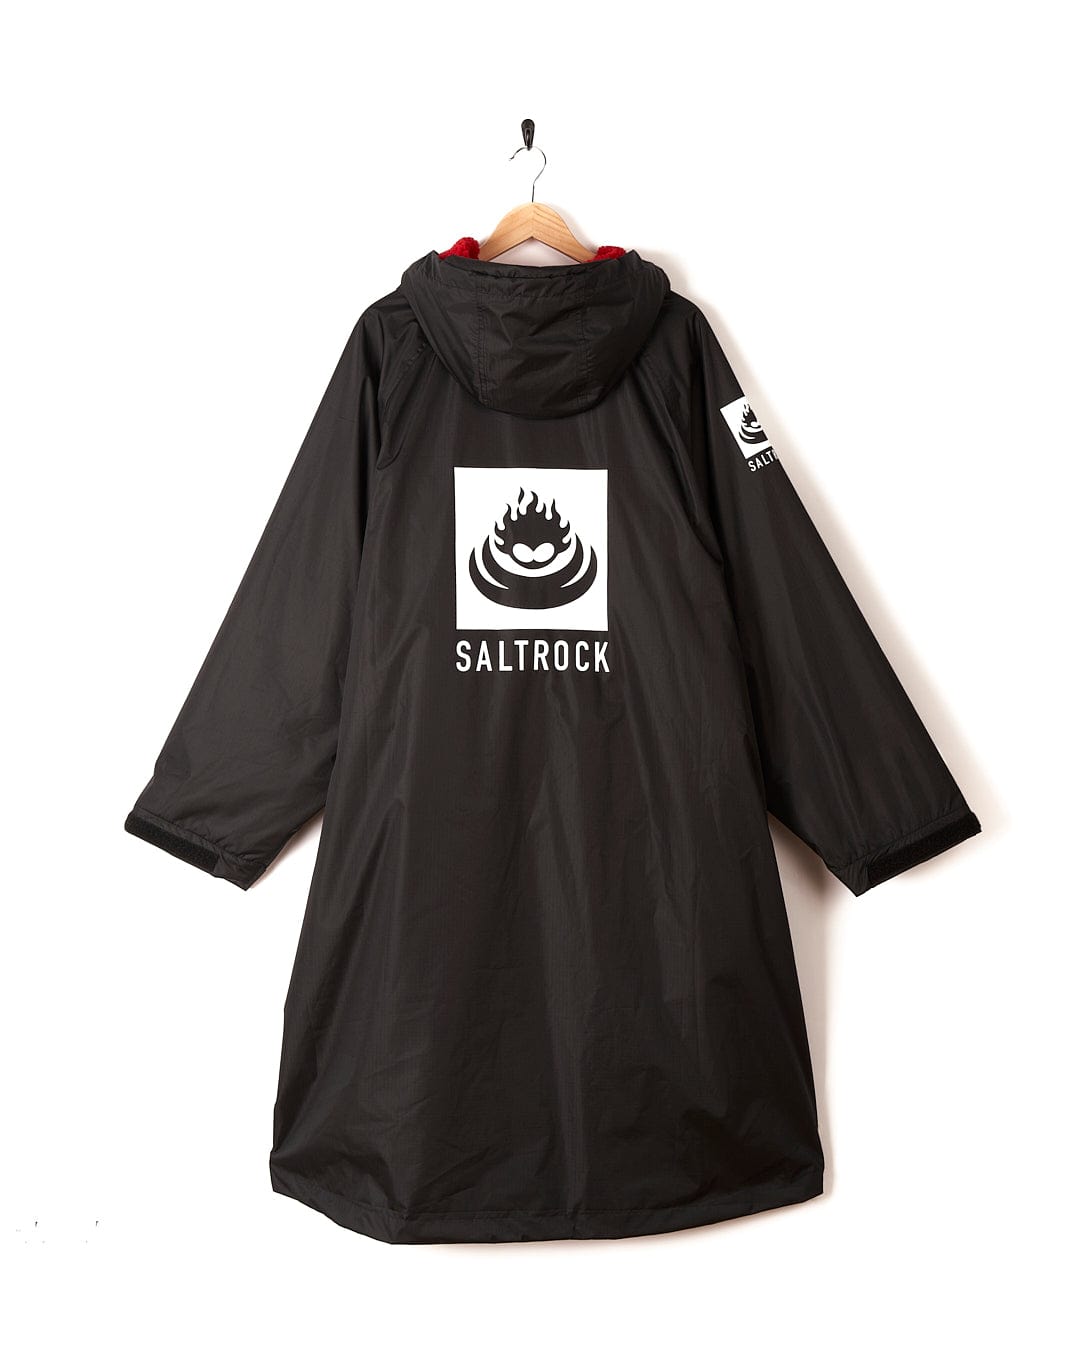 A black Saltrock branded Recycled Four Seasons Changing Robe - Black/Red hanging on a wooden hanger against a white background.